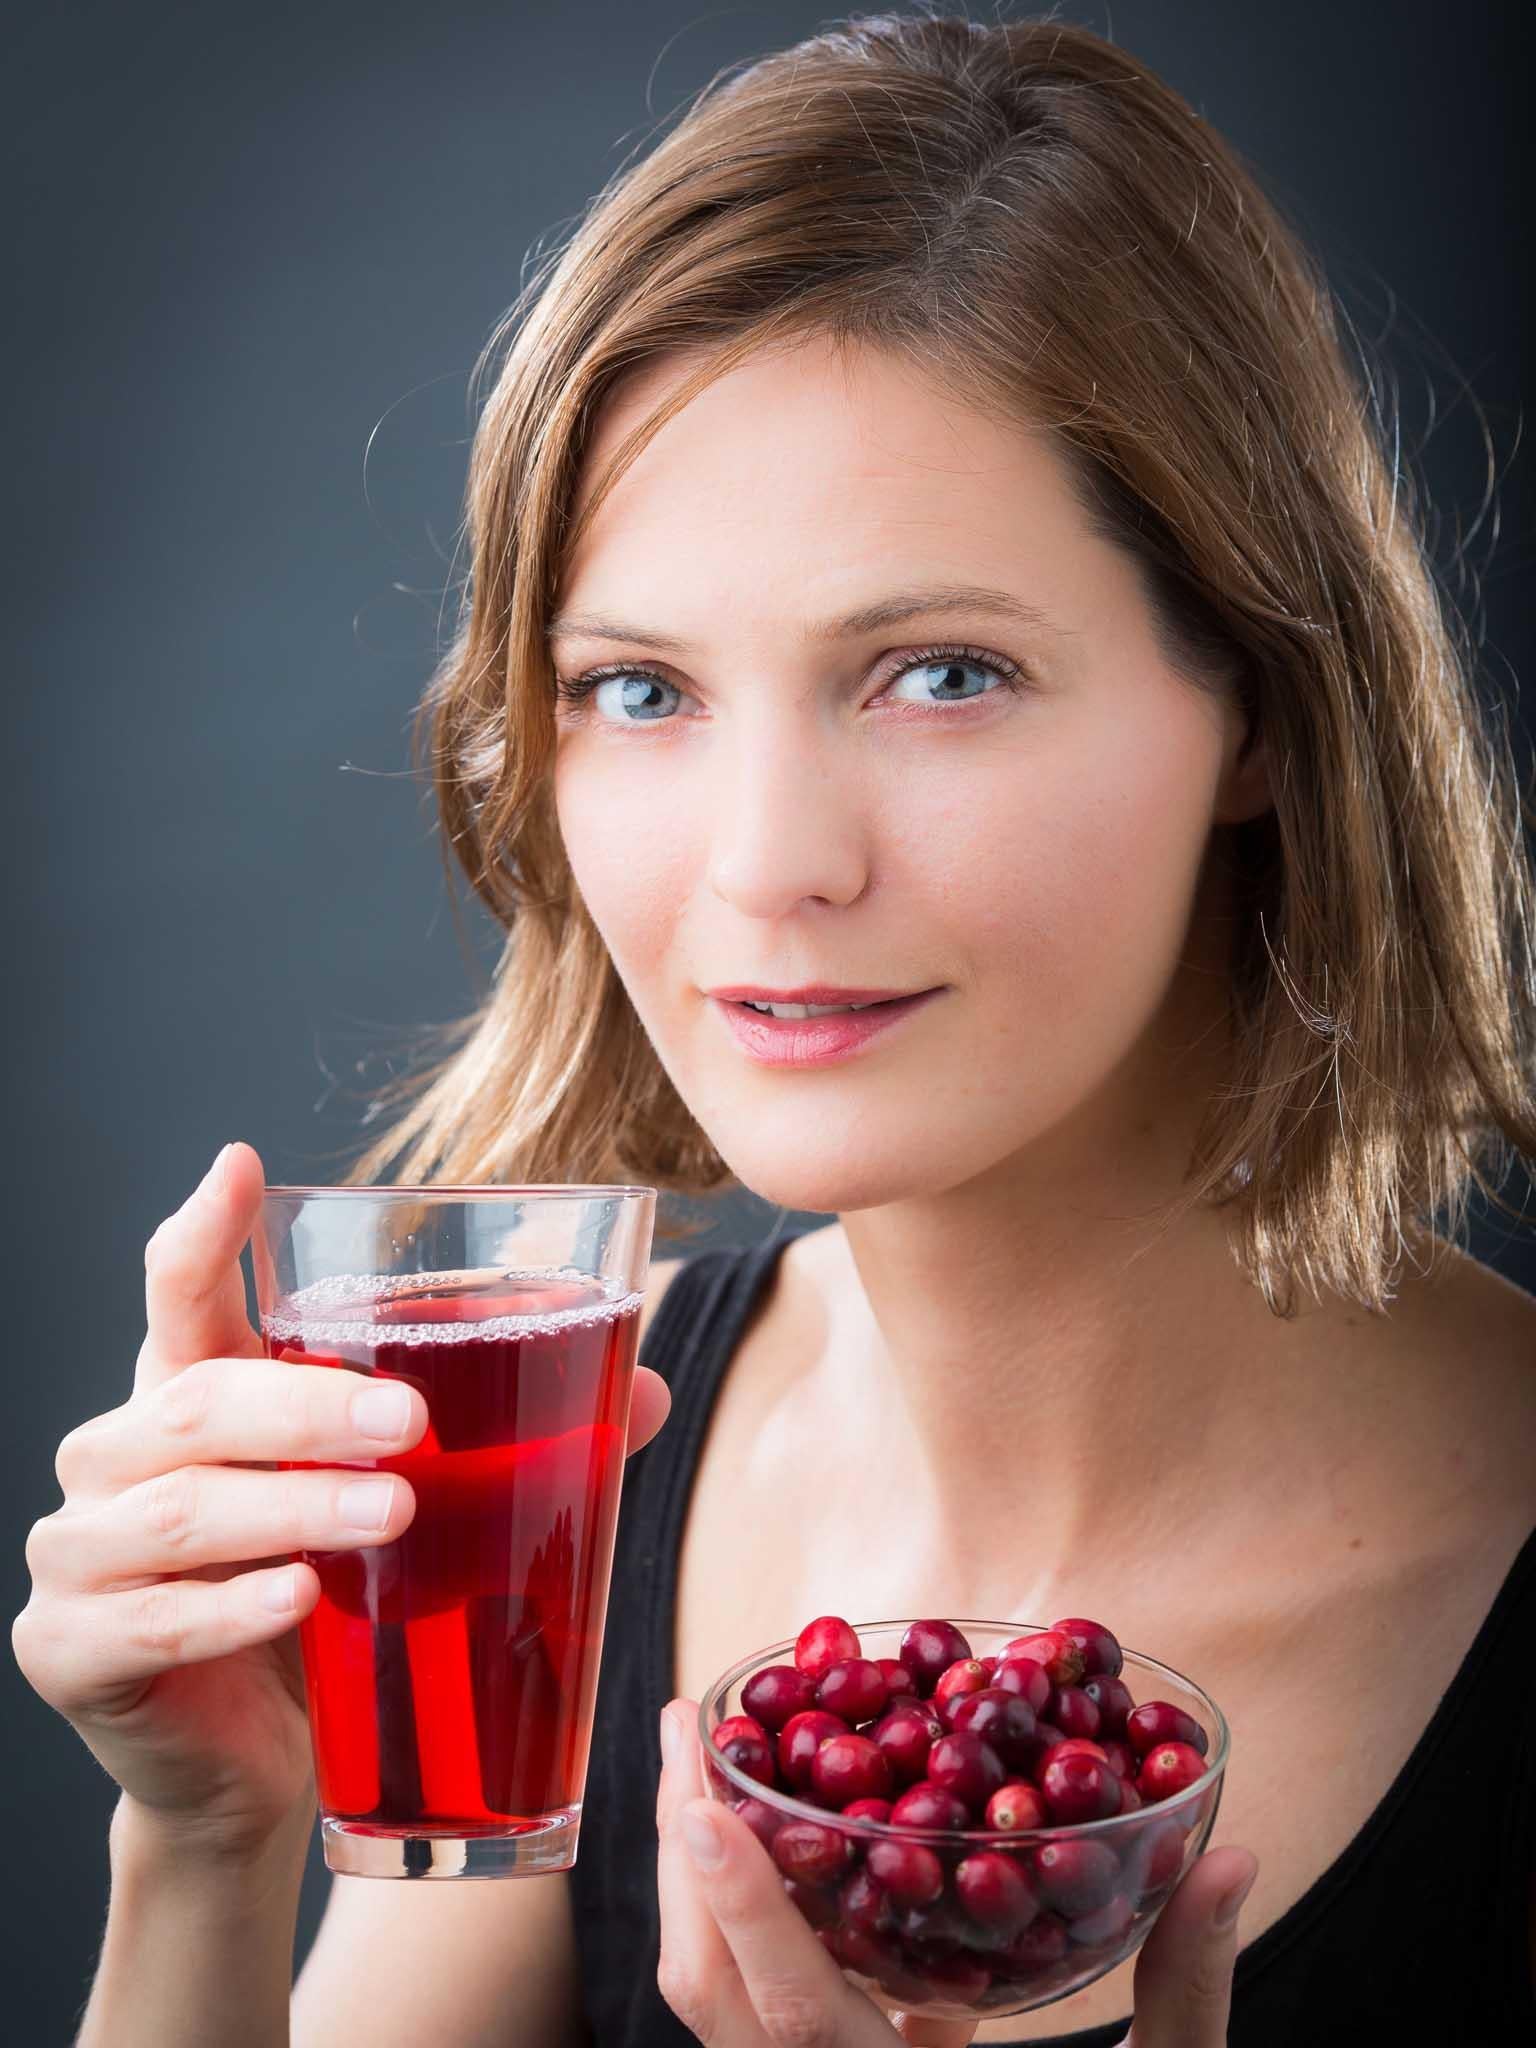 Over the course of a year the cranberry treatment made no difference to the presence of white blood cells or bacteria in the urine of women